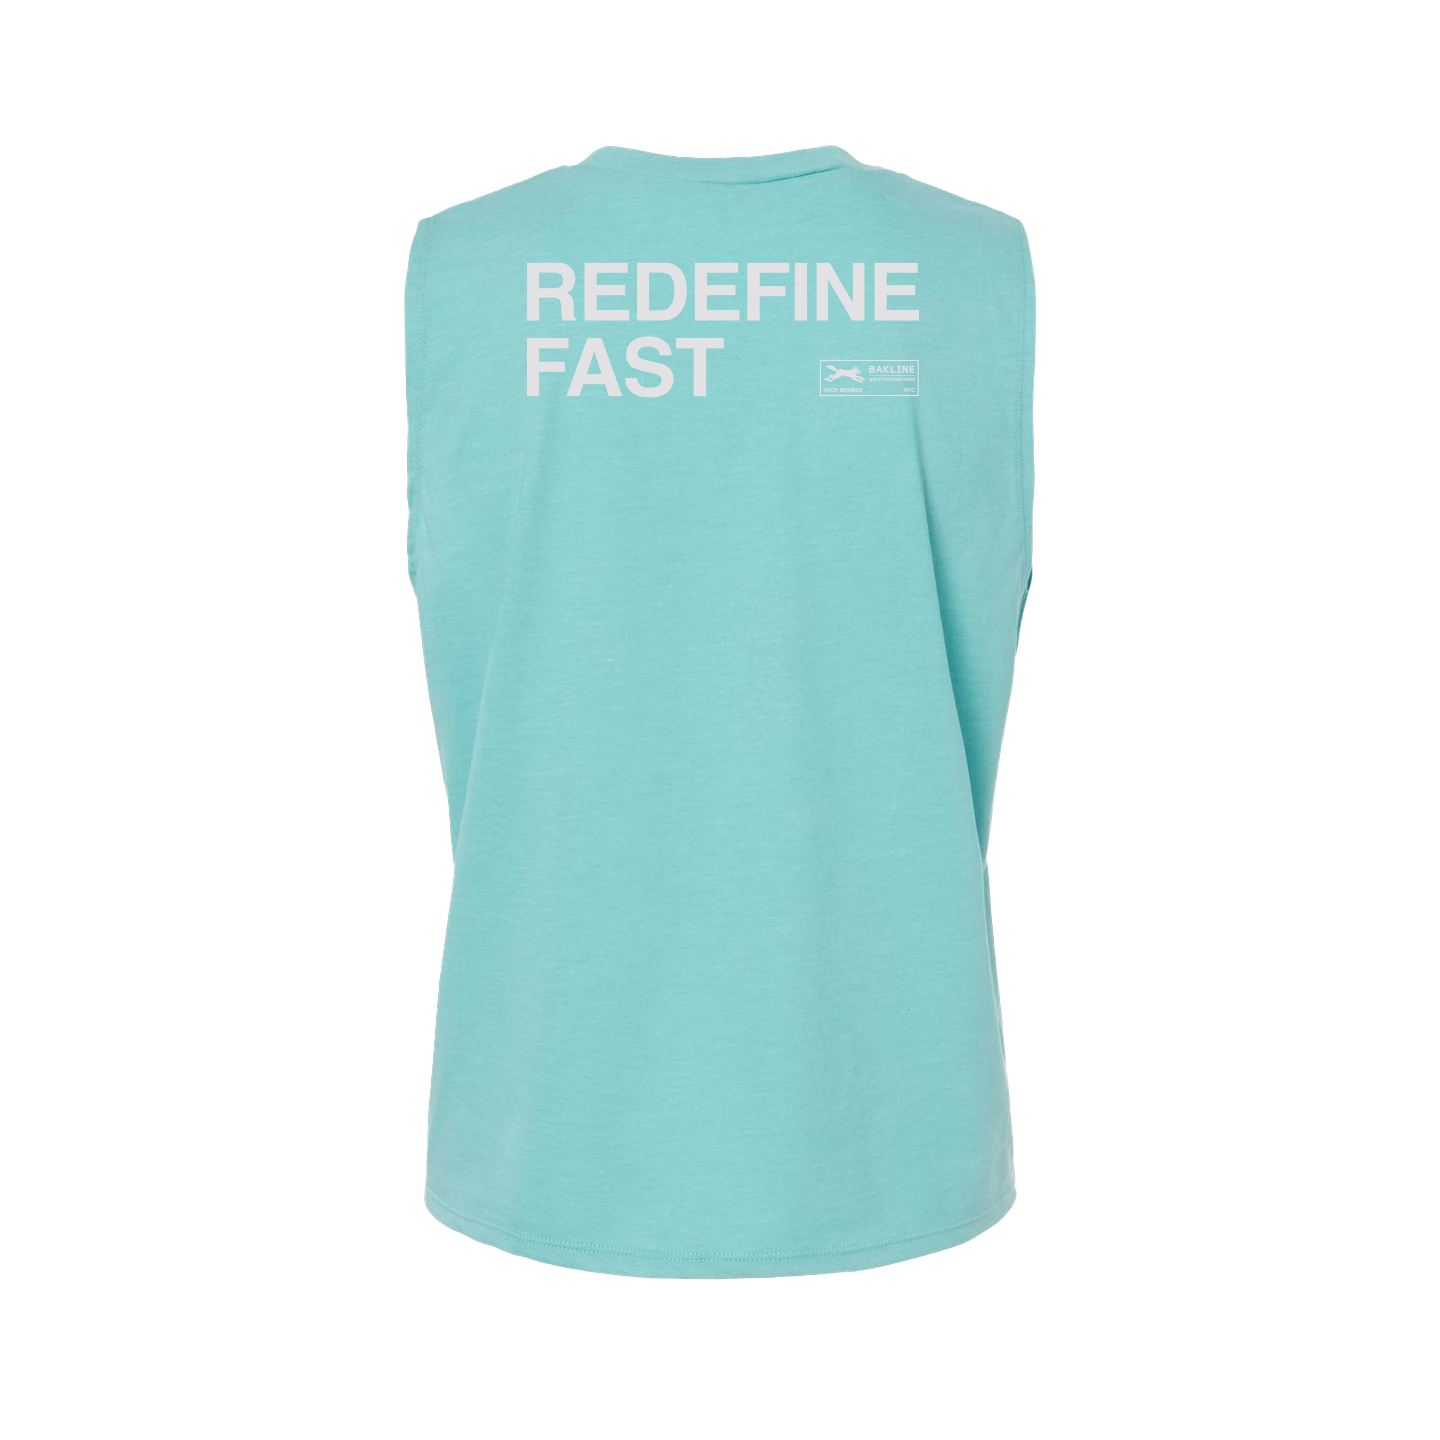 Redefine Fast - Short Muscle - Contoured Relaxed - Bakline